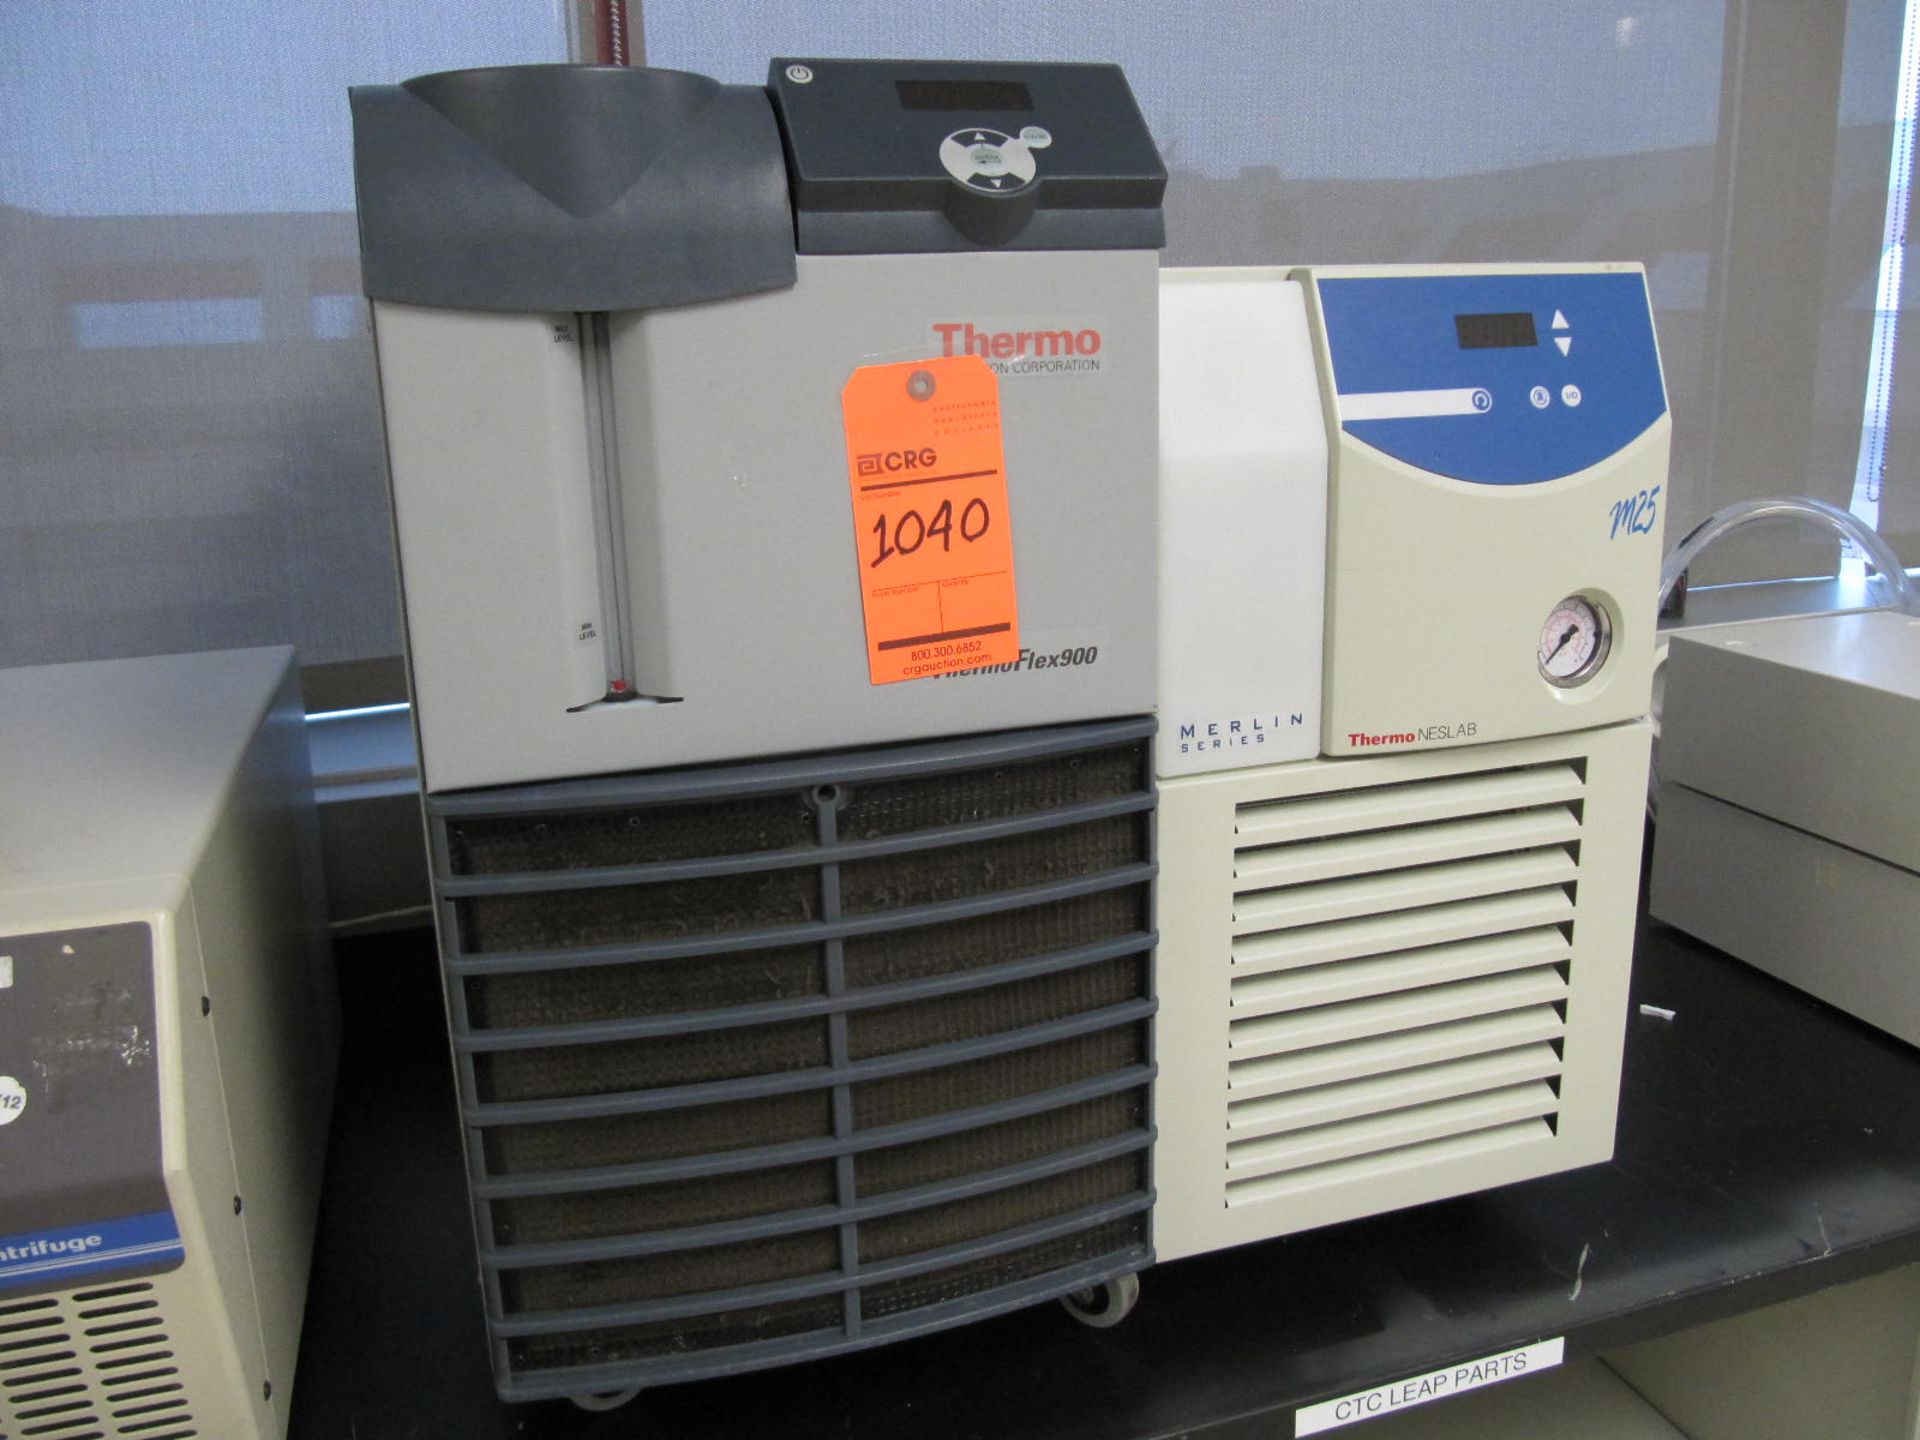 Lot of (2) Thermo assorted chillers including: (1) Flex 900 and (1) M25, located in building 5,